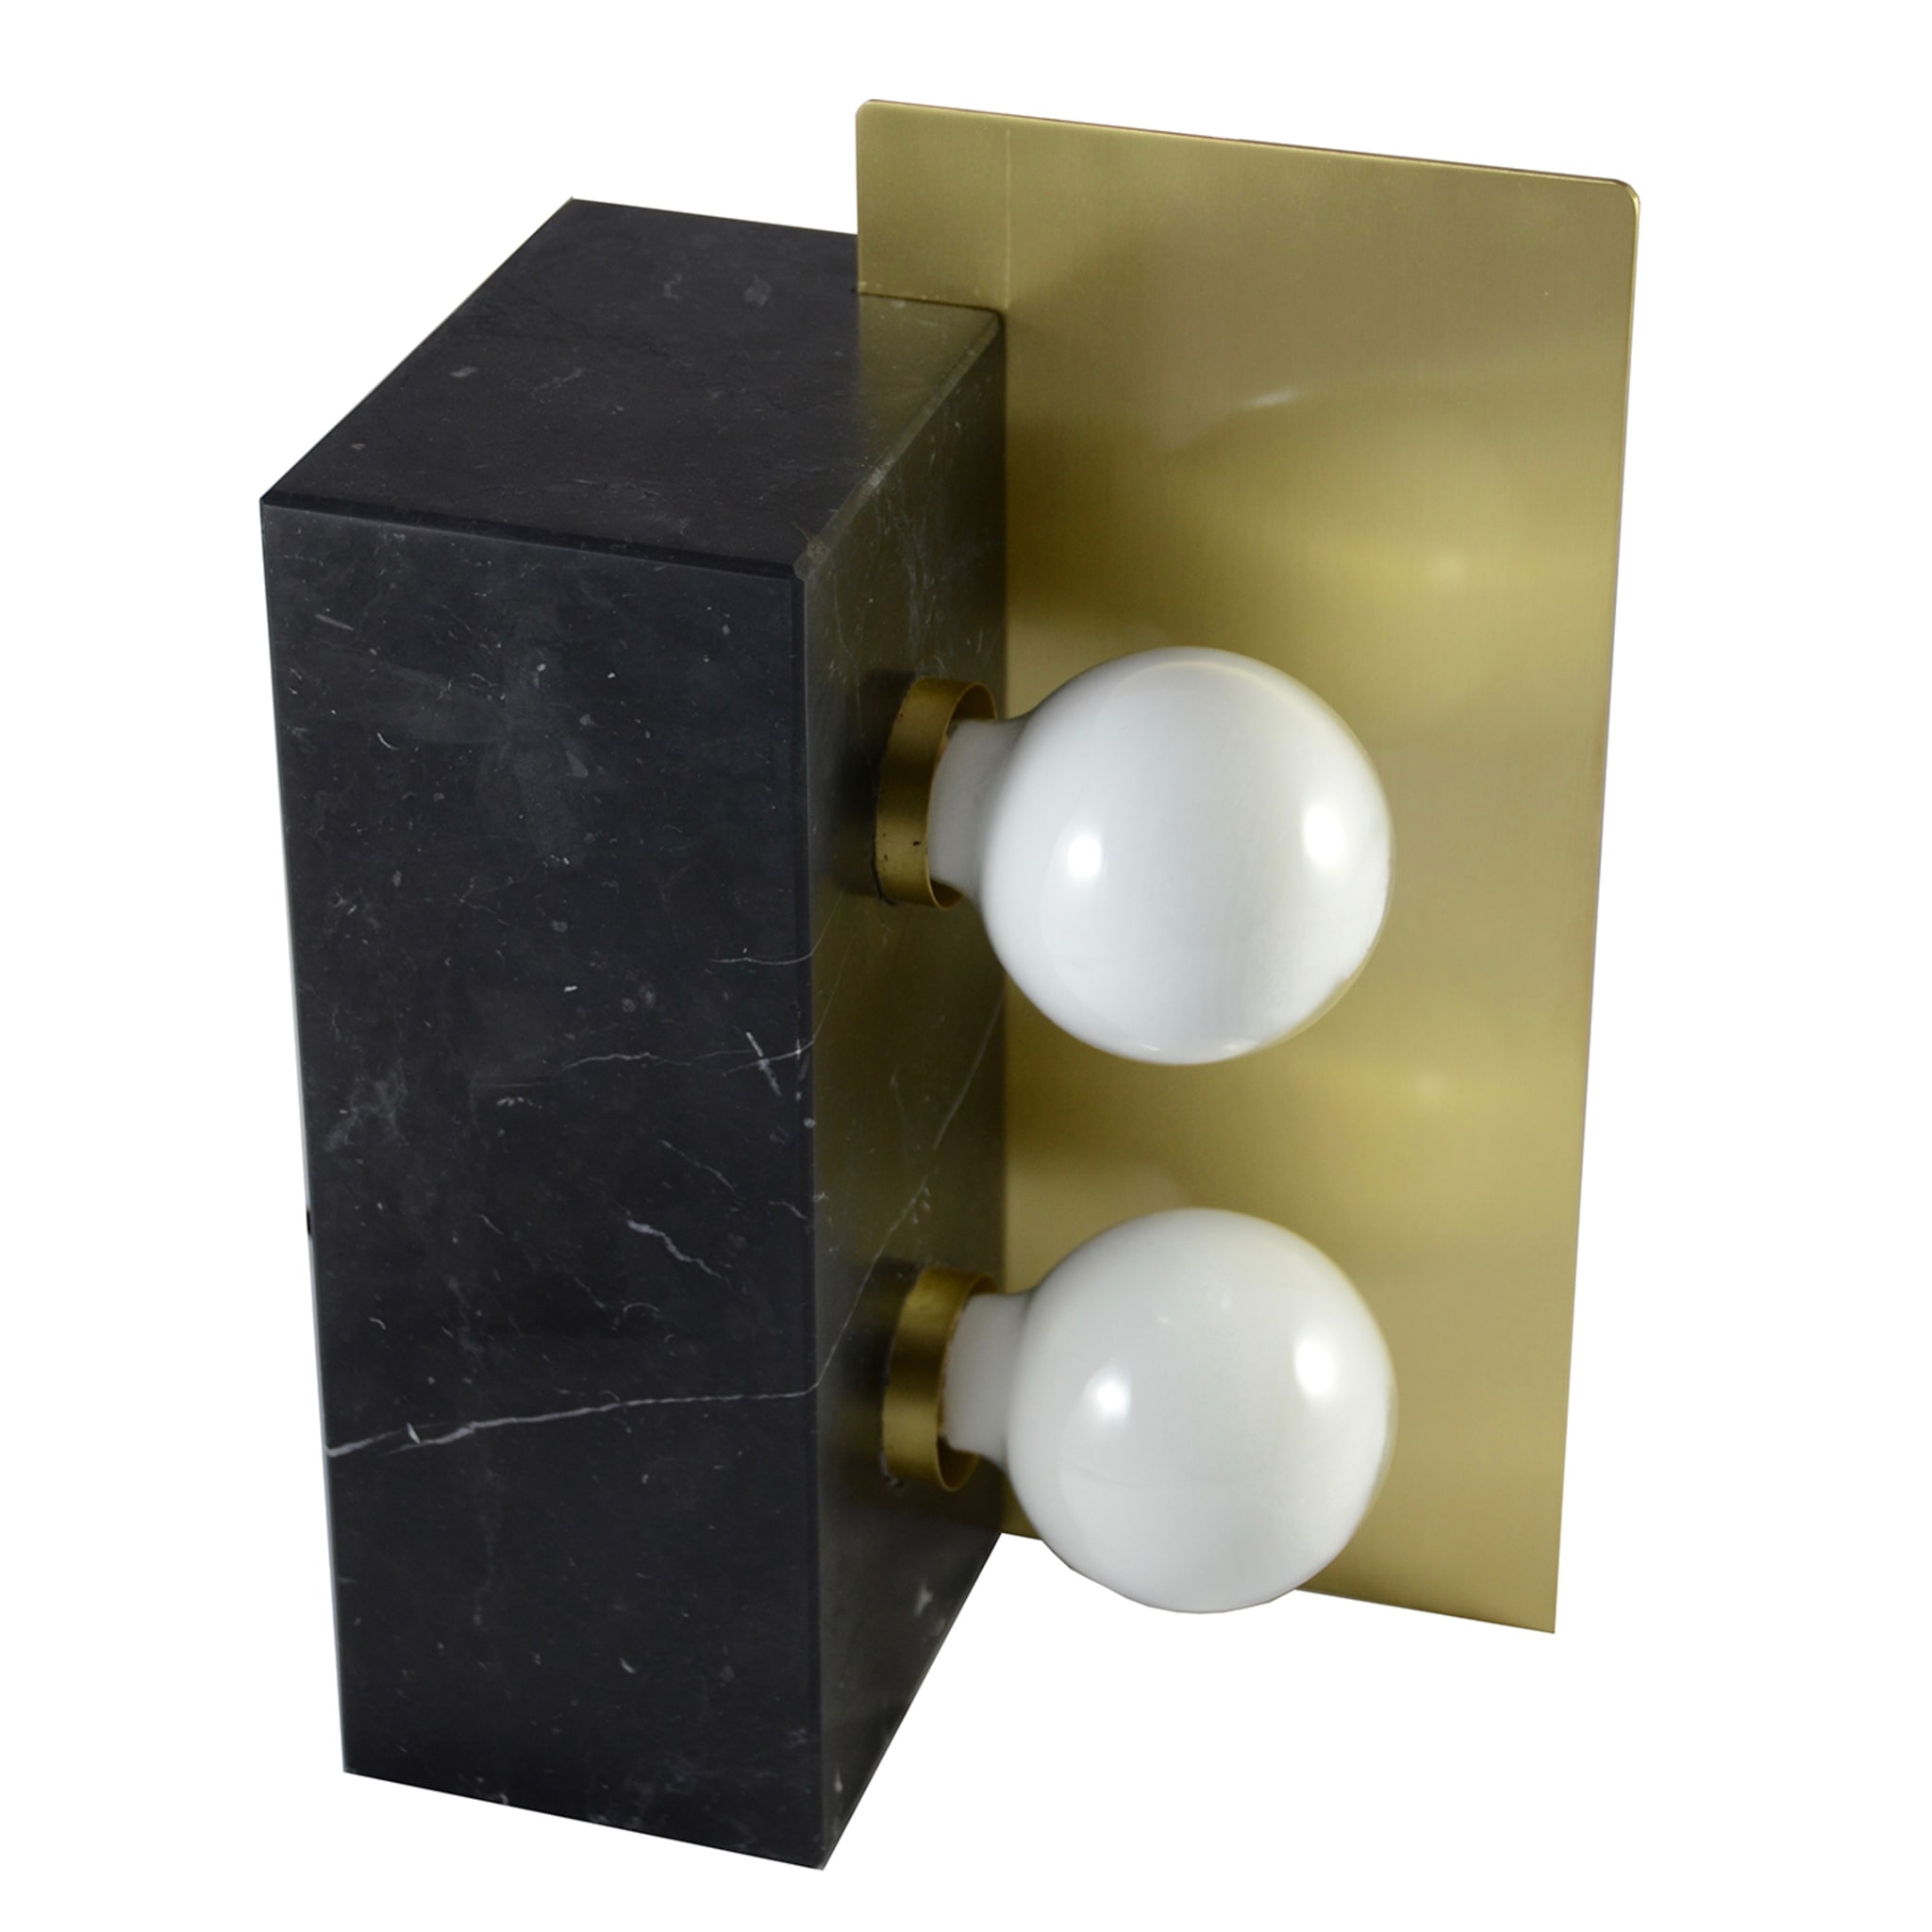 "Cubus" Table Lamp in Satin Marquinha Marble and Satin Brass - Alternative view 2